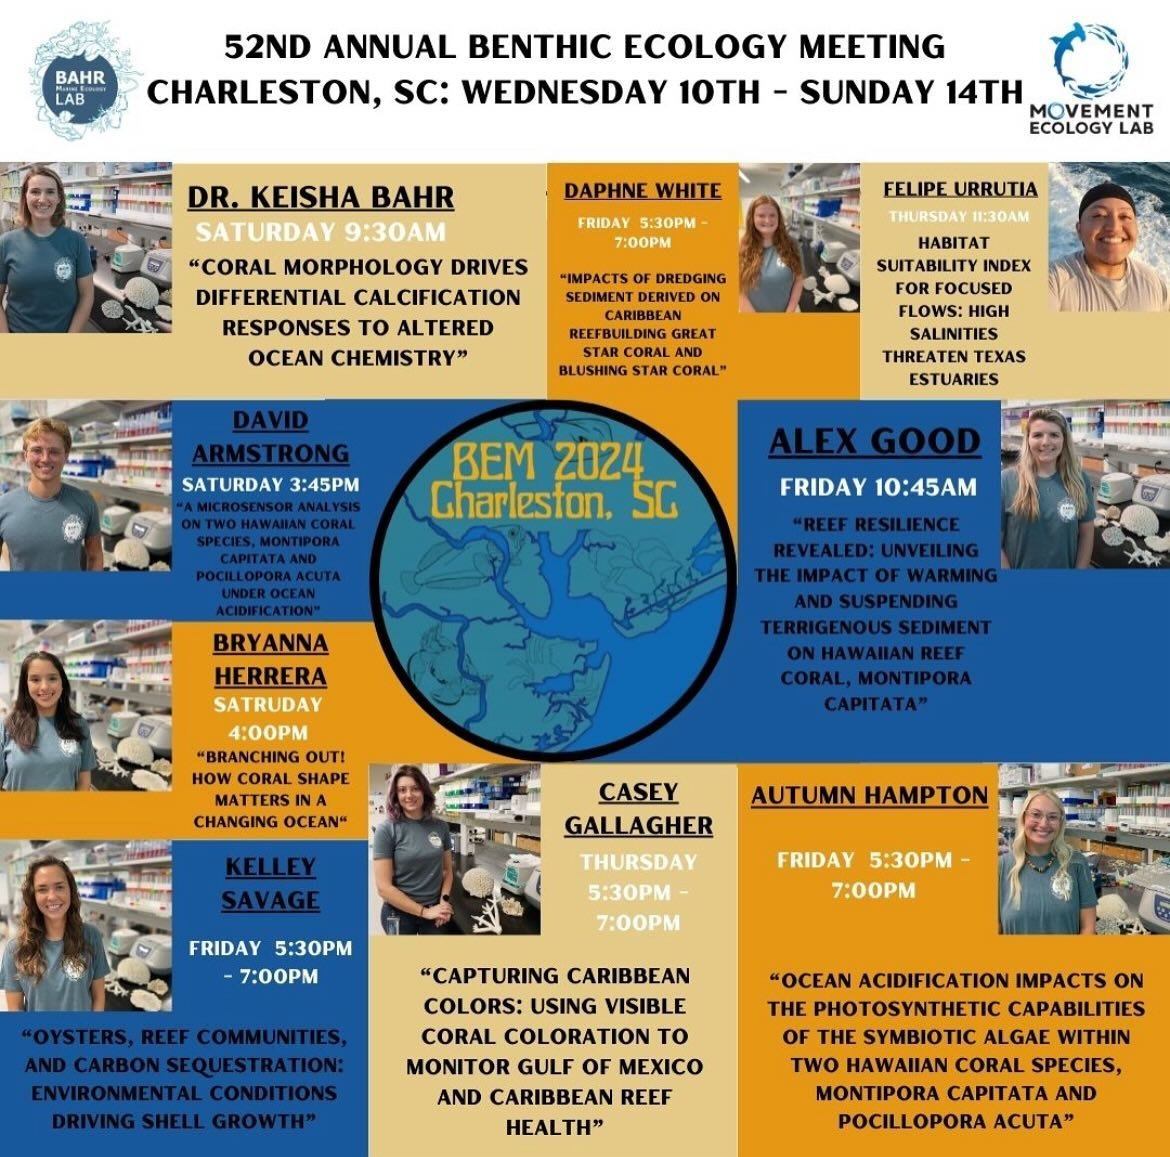 Goodbye Corpus, Hello Charleston 👋🏻 9 members of the Coffey-Bahr bunch are presenting at this year&rsquo;s Benthic Ecology Meeting in Charleston, SC! Will you be joining us? We are so excited to meet new people &amp; share our wide-ranging research